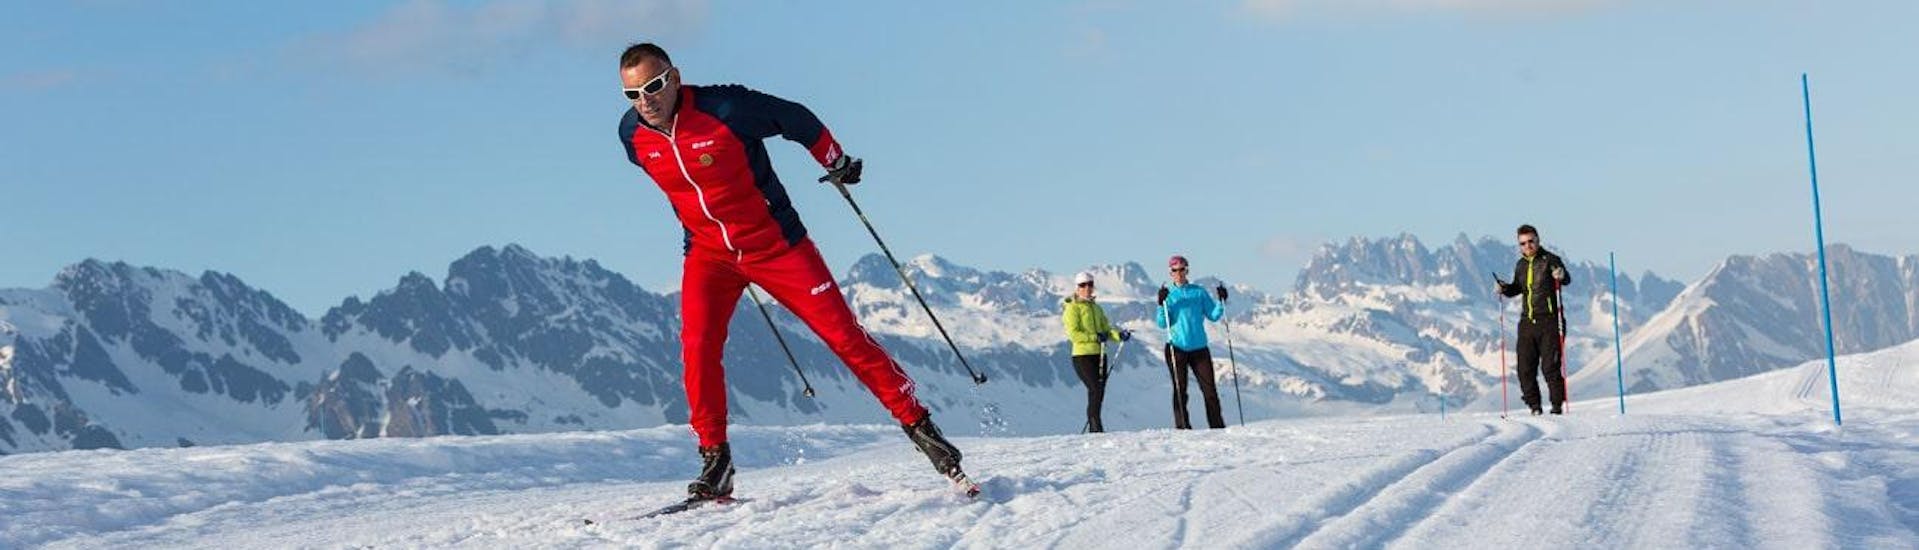 Two skiers are observing their cross-country skiing instructor of the ski school ESF Chamonix during their Cross-Country Skiing Lessons for Adults - All Levels.